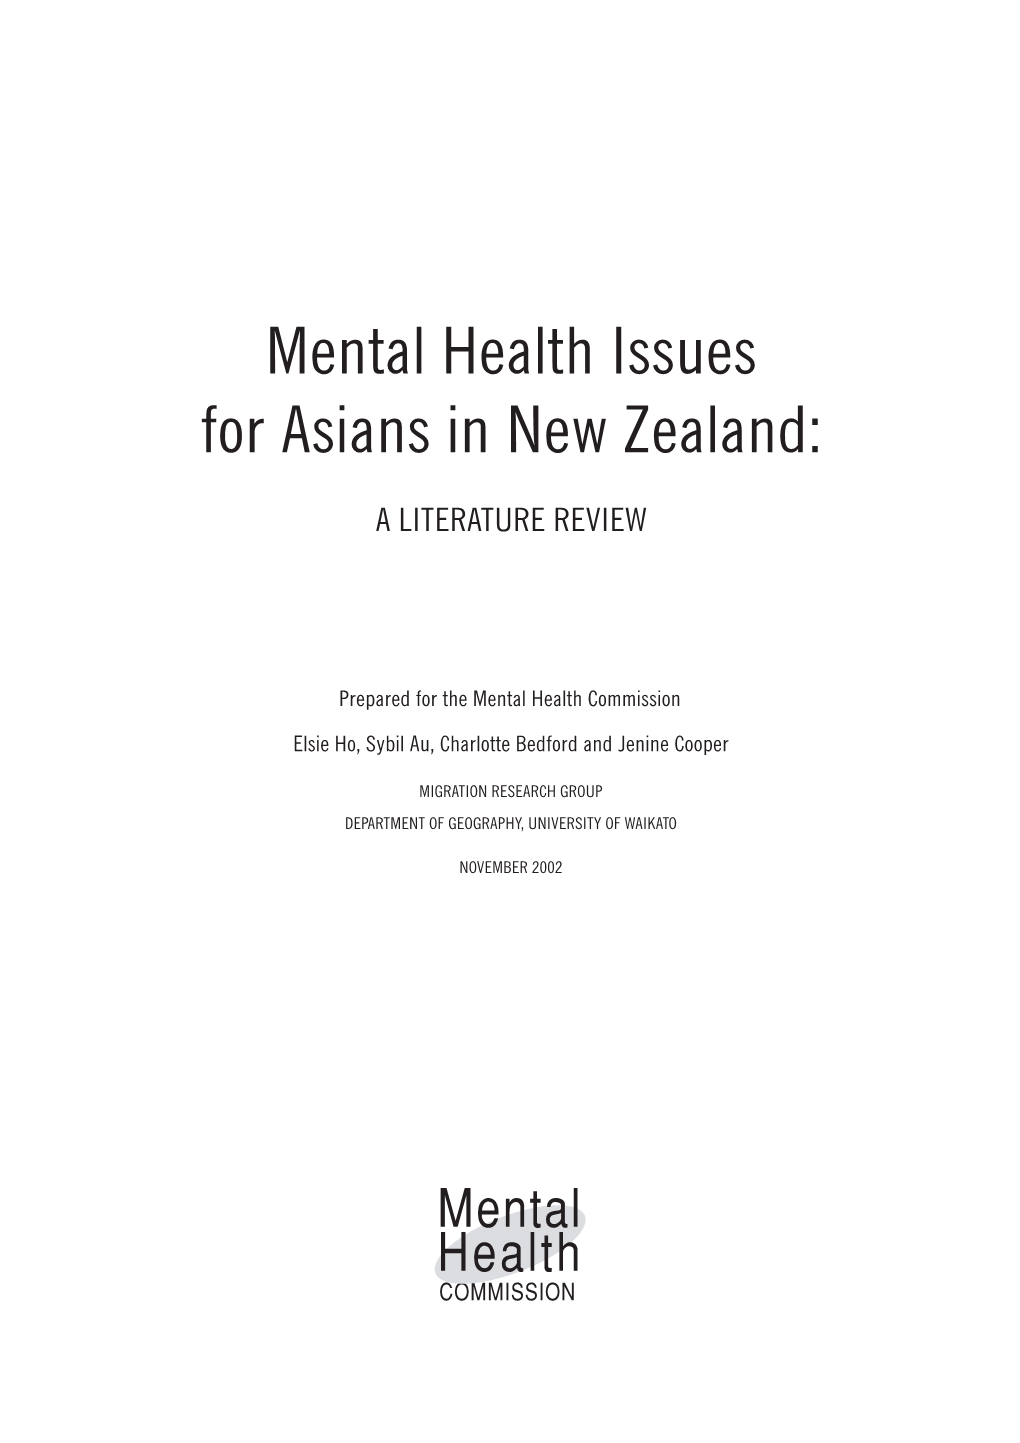 Mental Health Issues for Asians in New Zealand: a Literature Review Foreword